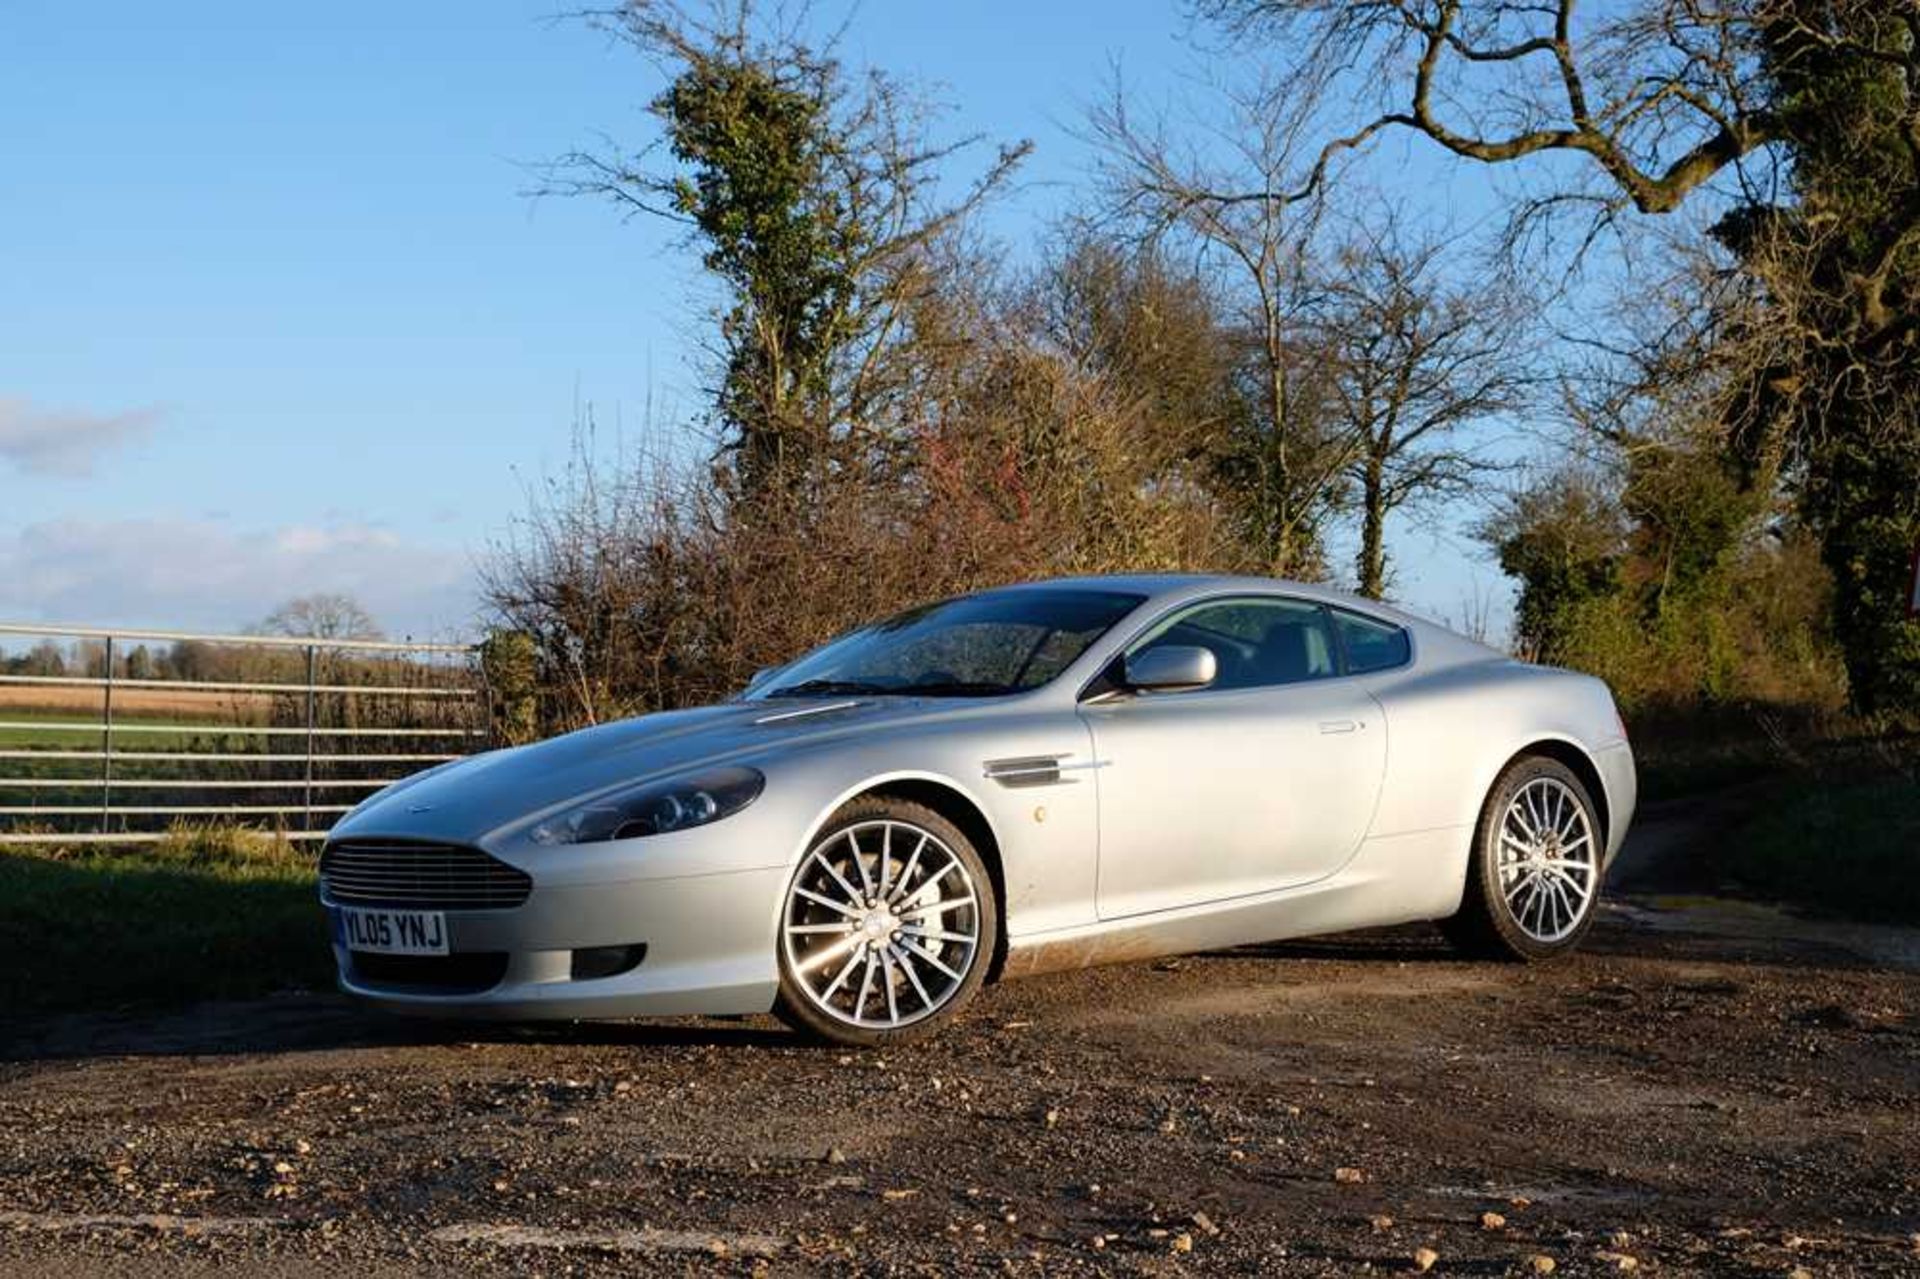 2005 Aston Martin DB9 c.25,000 from new and 4 former keepers - Image 9 of 59